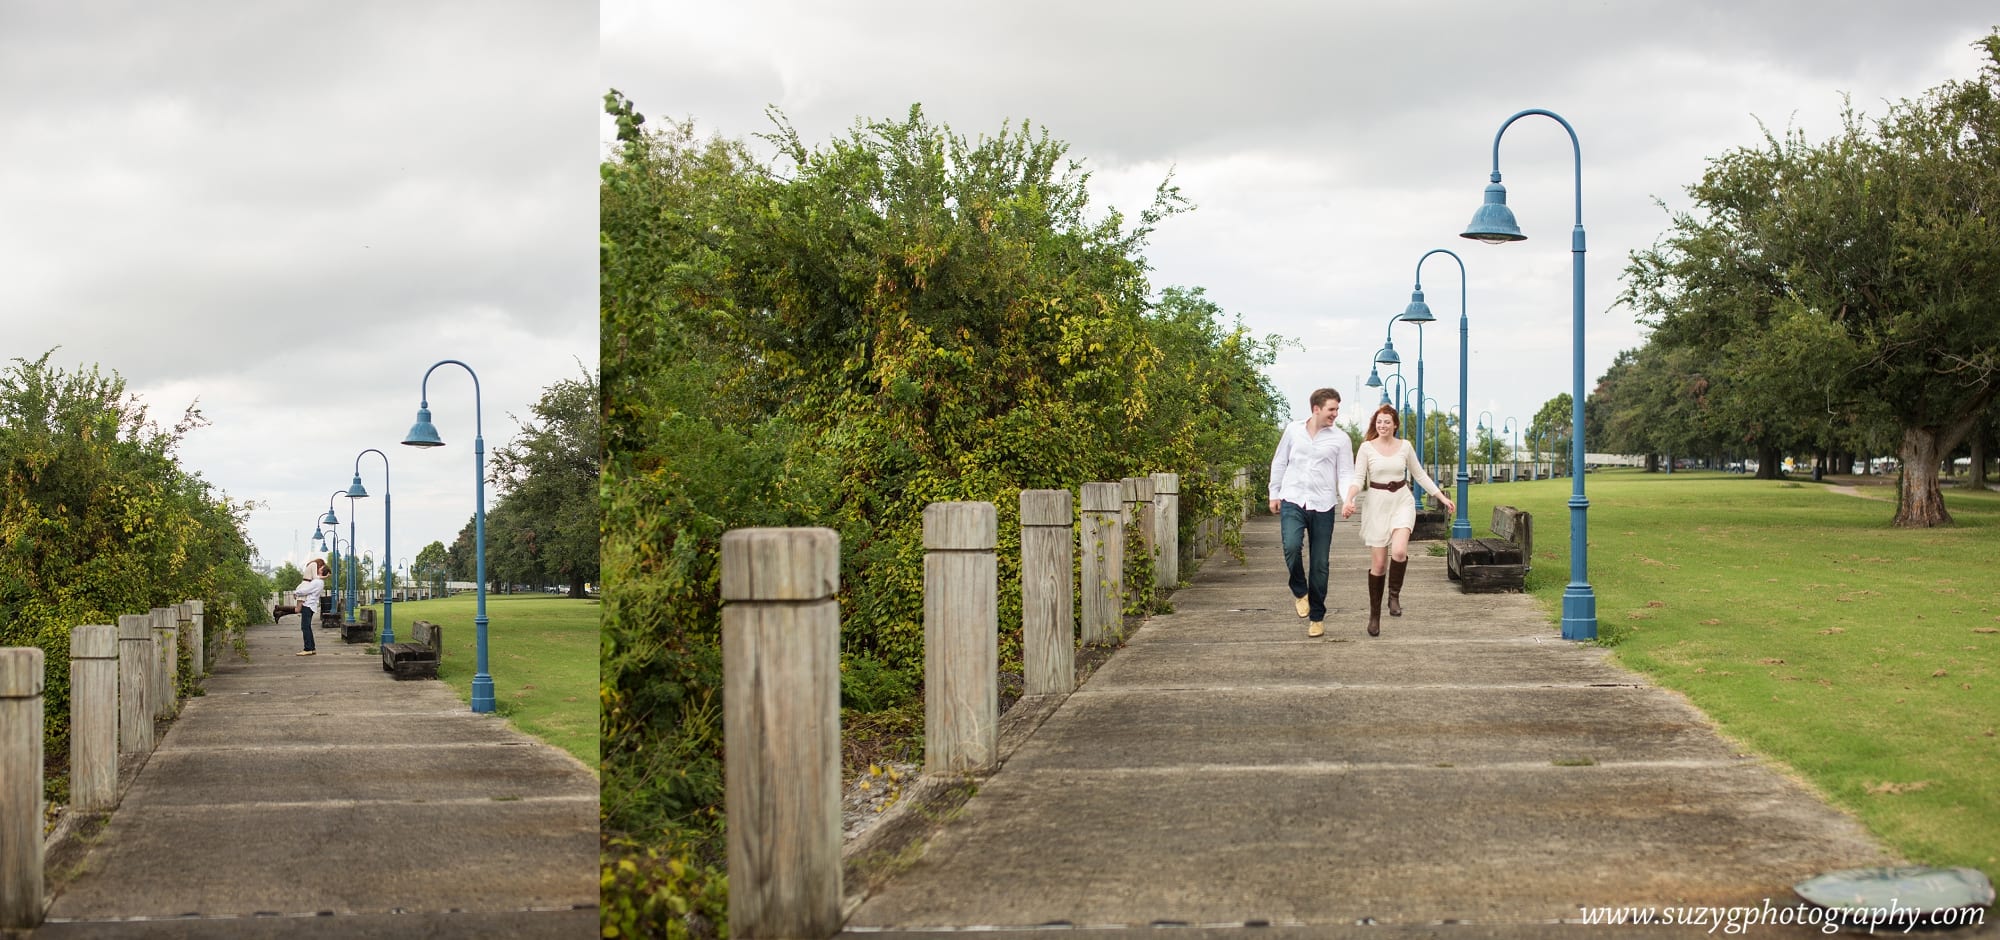 engagements-new orleans-texas-baton rouge-lake charles-suzy g-photography-suzygphotography_0139